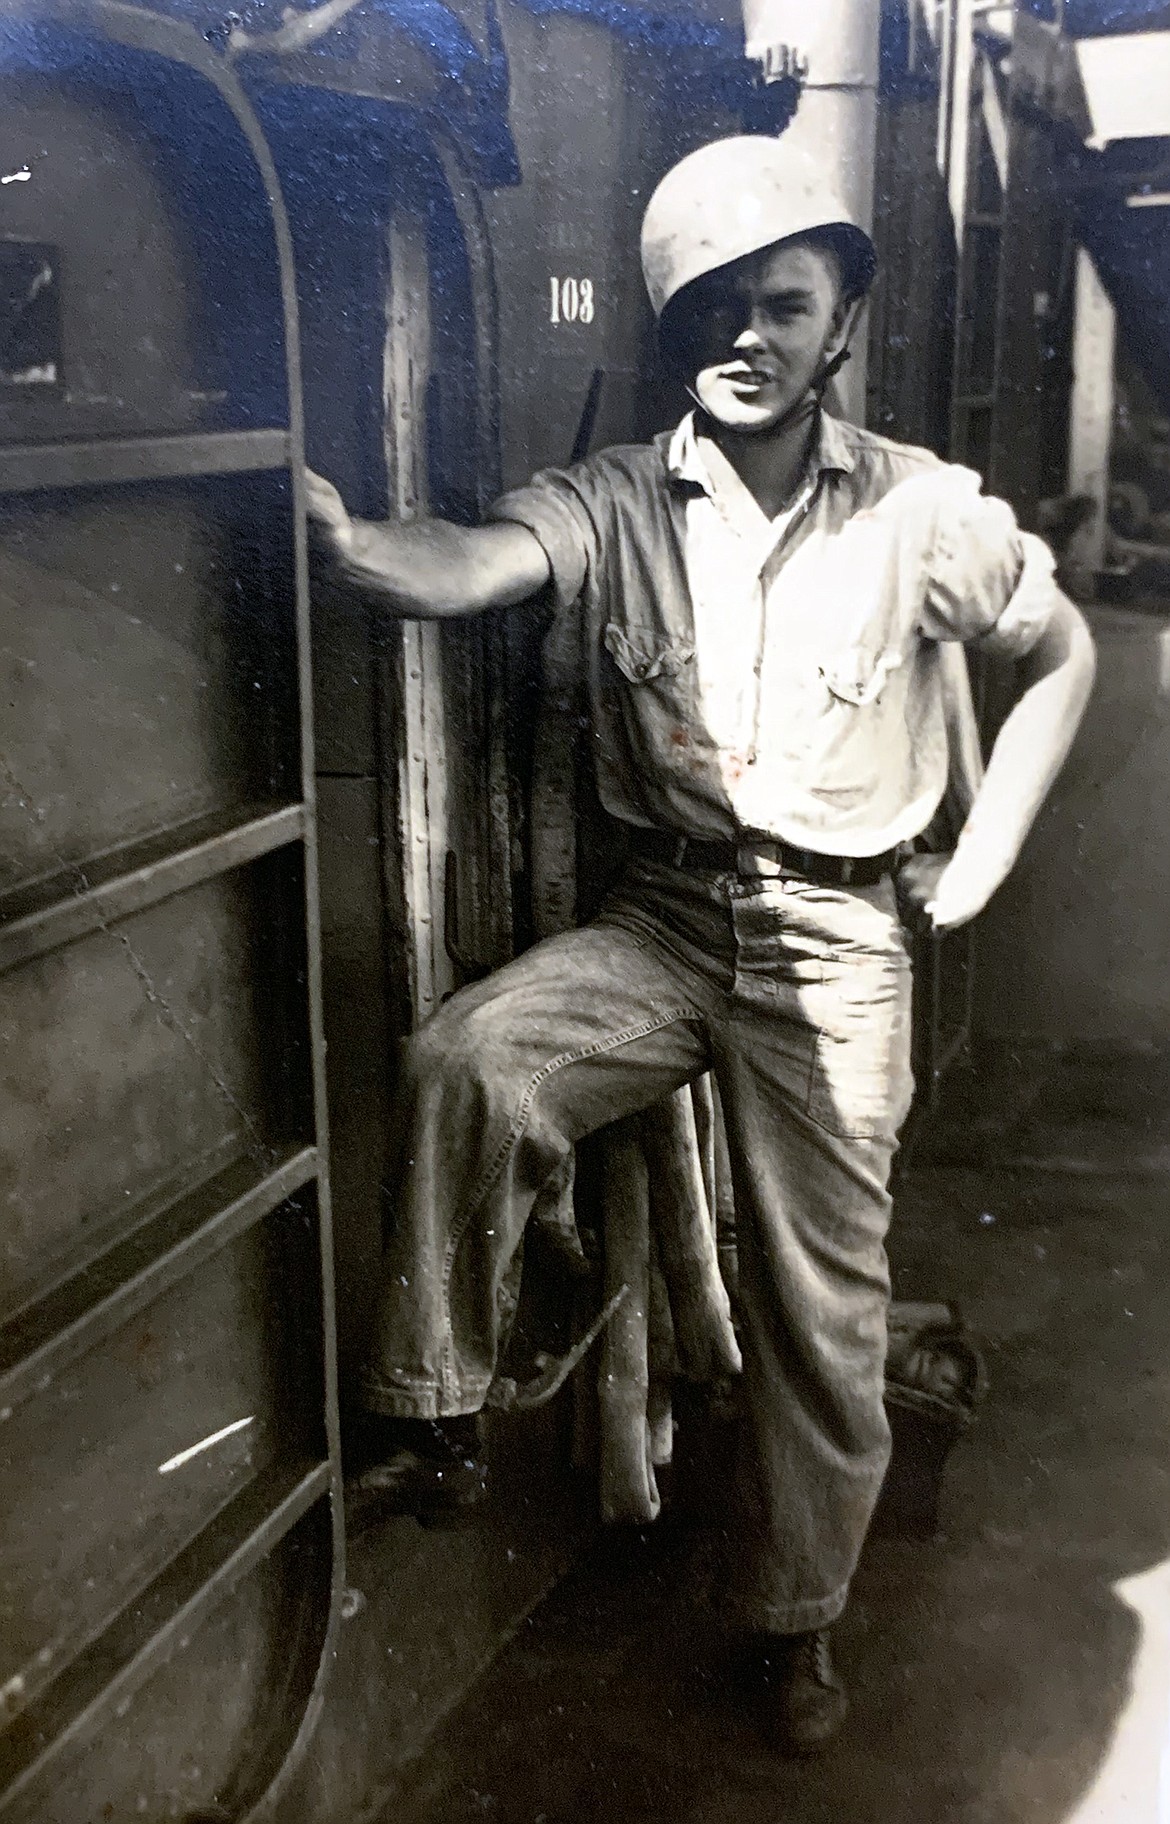 Arnold Peterson aboard the destroyer U.S.S. Healy during World War II. (photo provided)